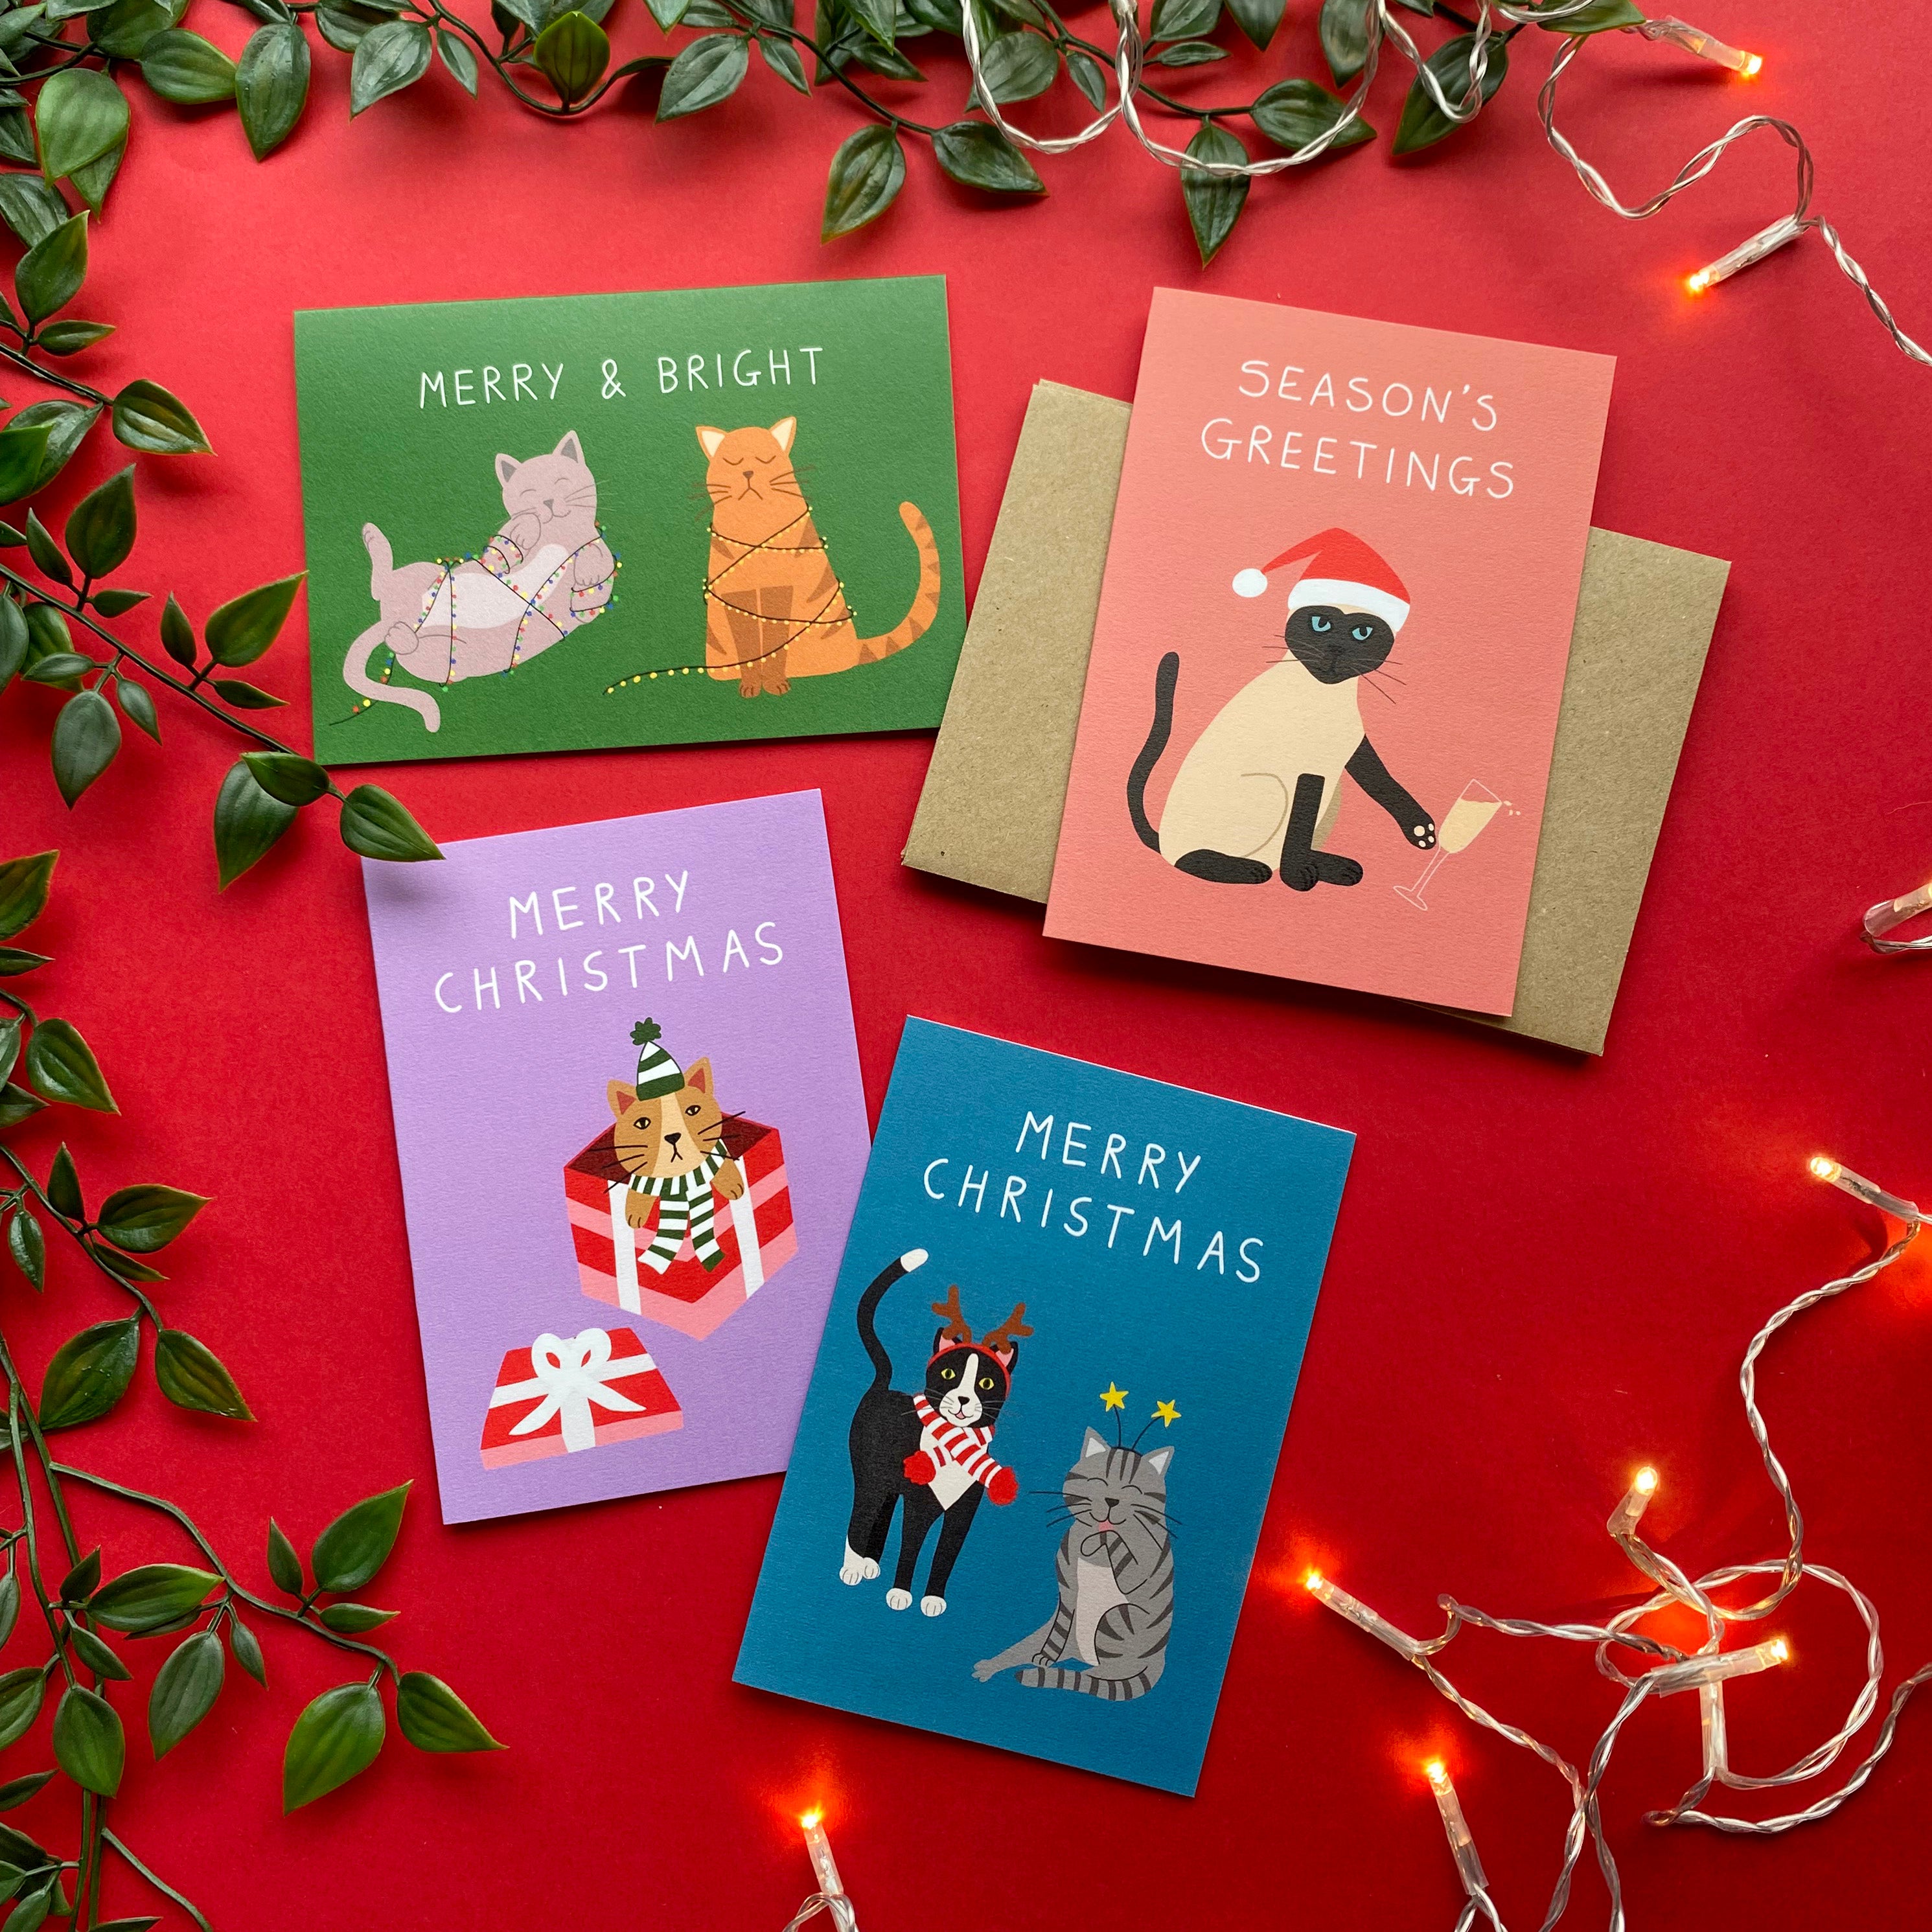 Pack of Christmas cards with cats